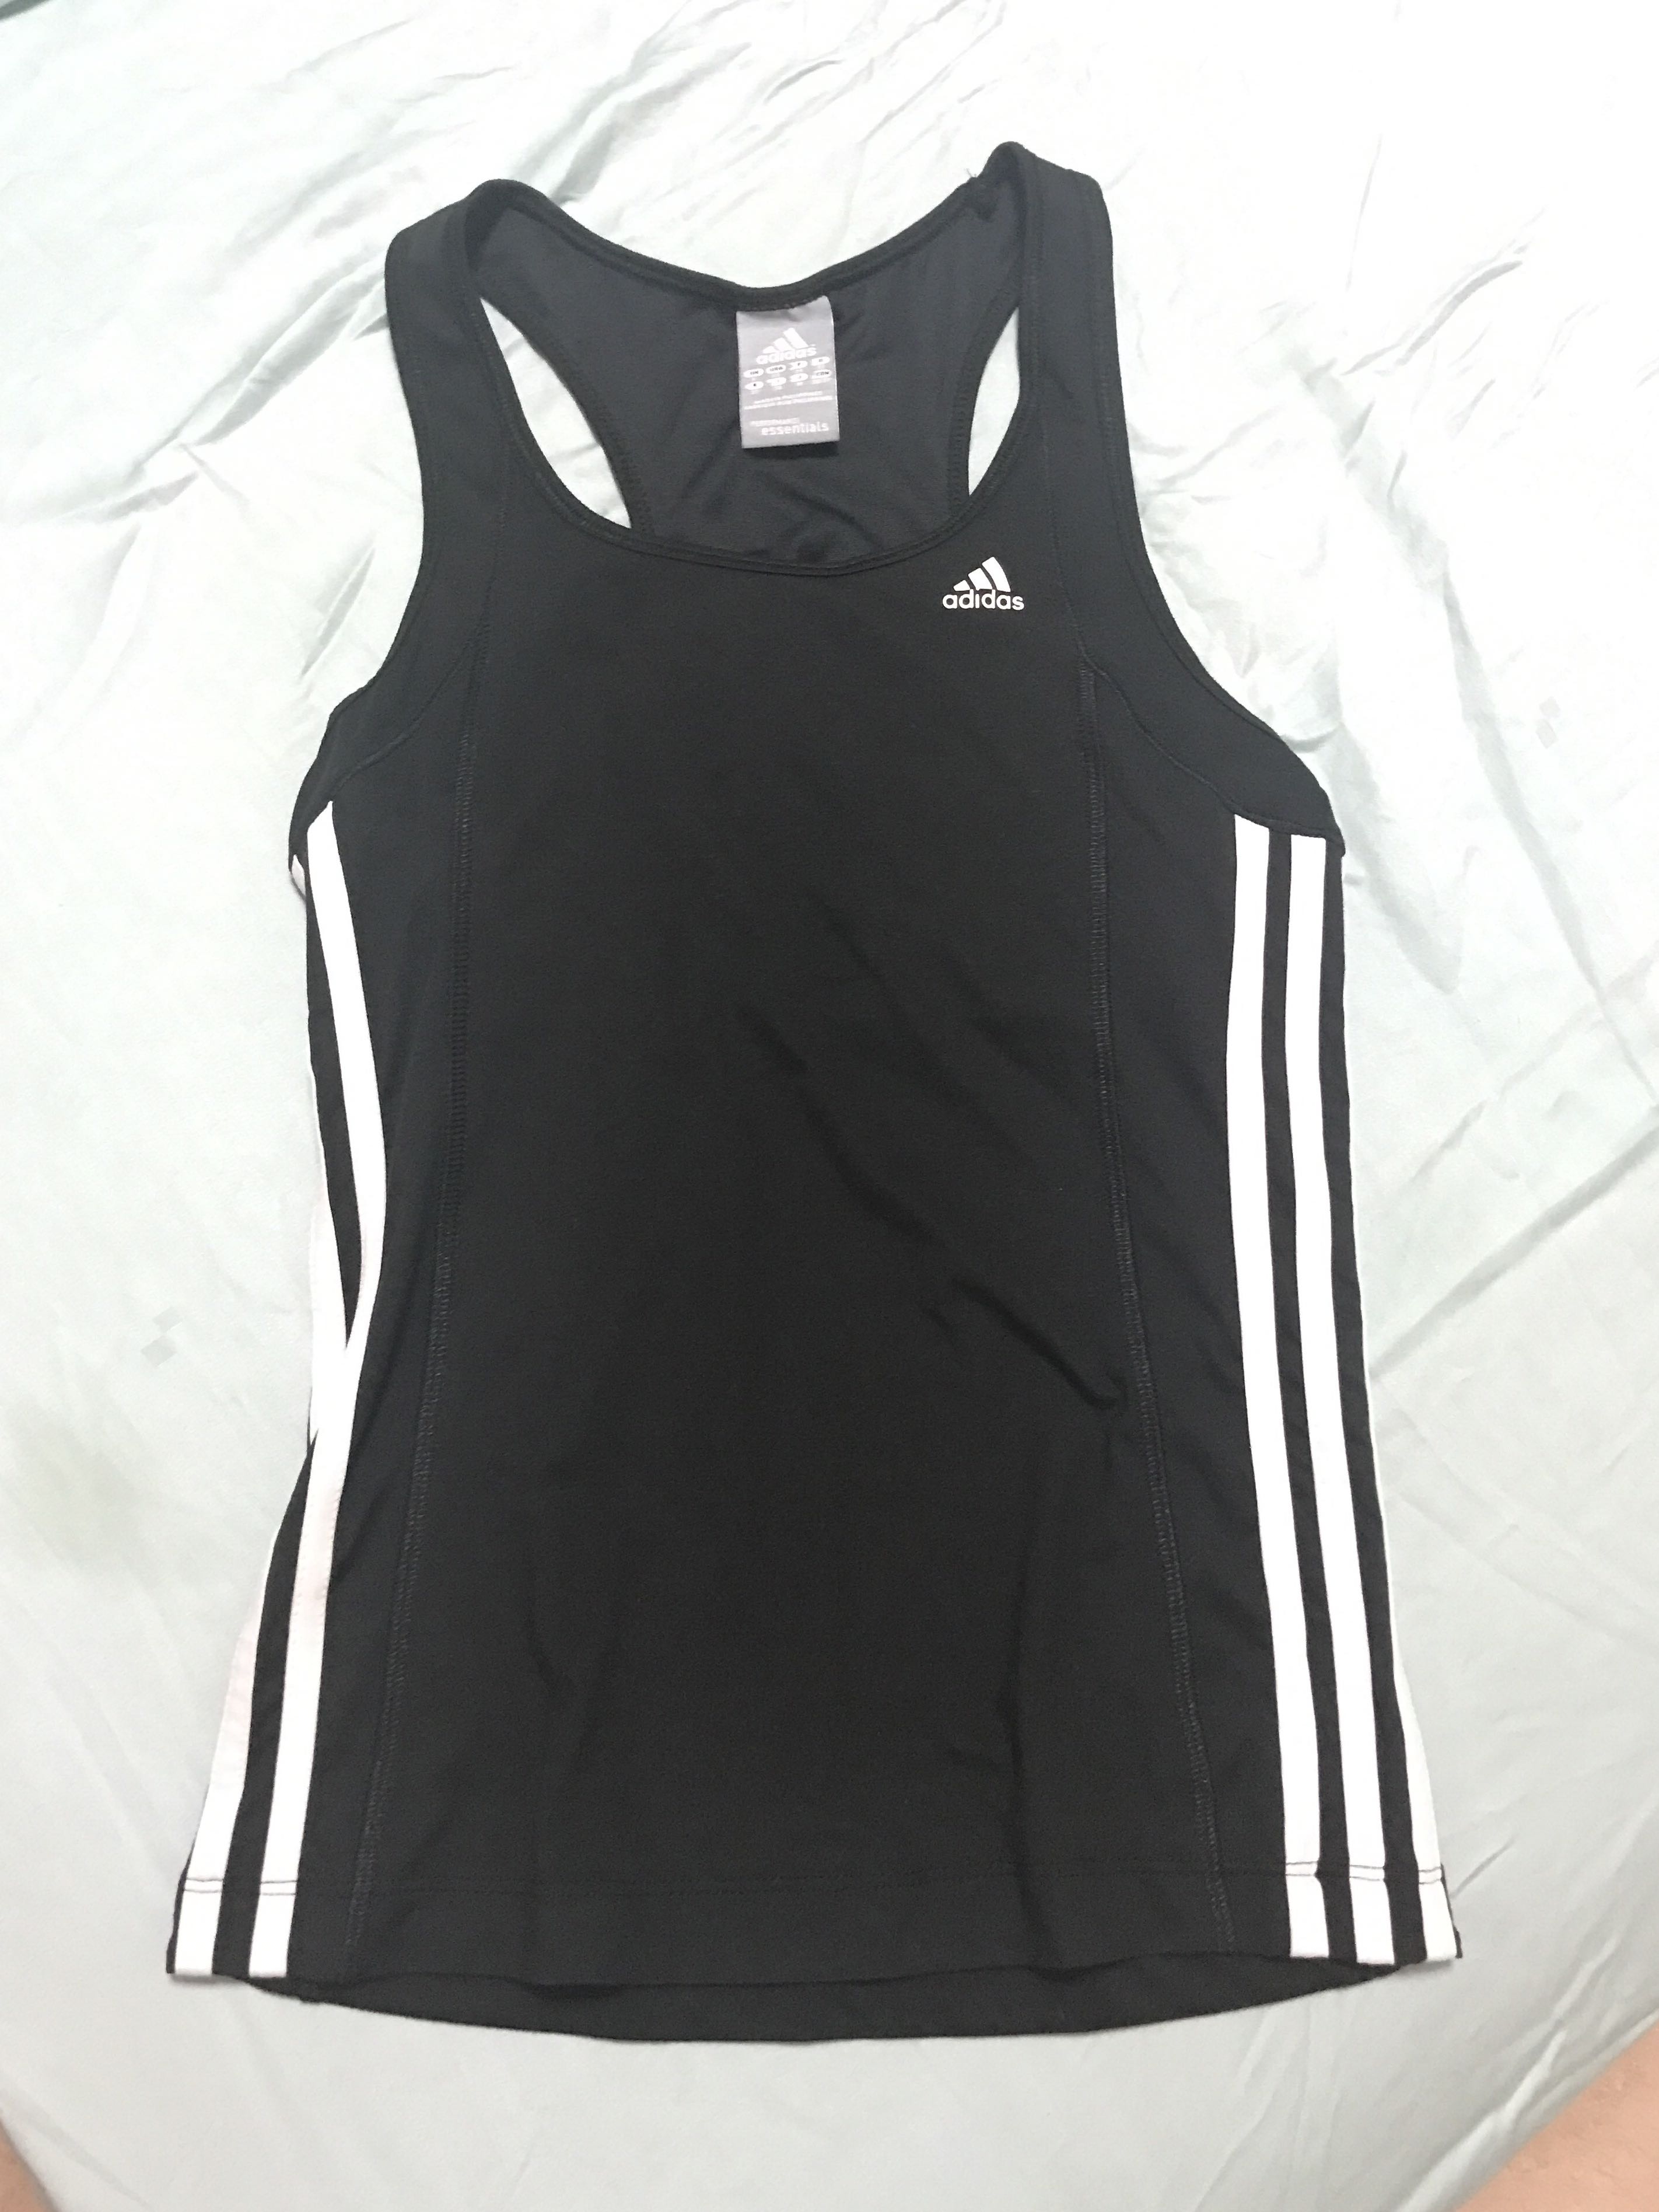 Adidas Climalite Women's Tank Top in 